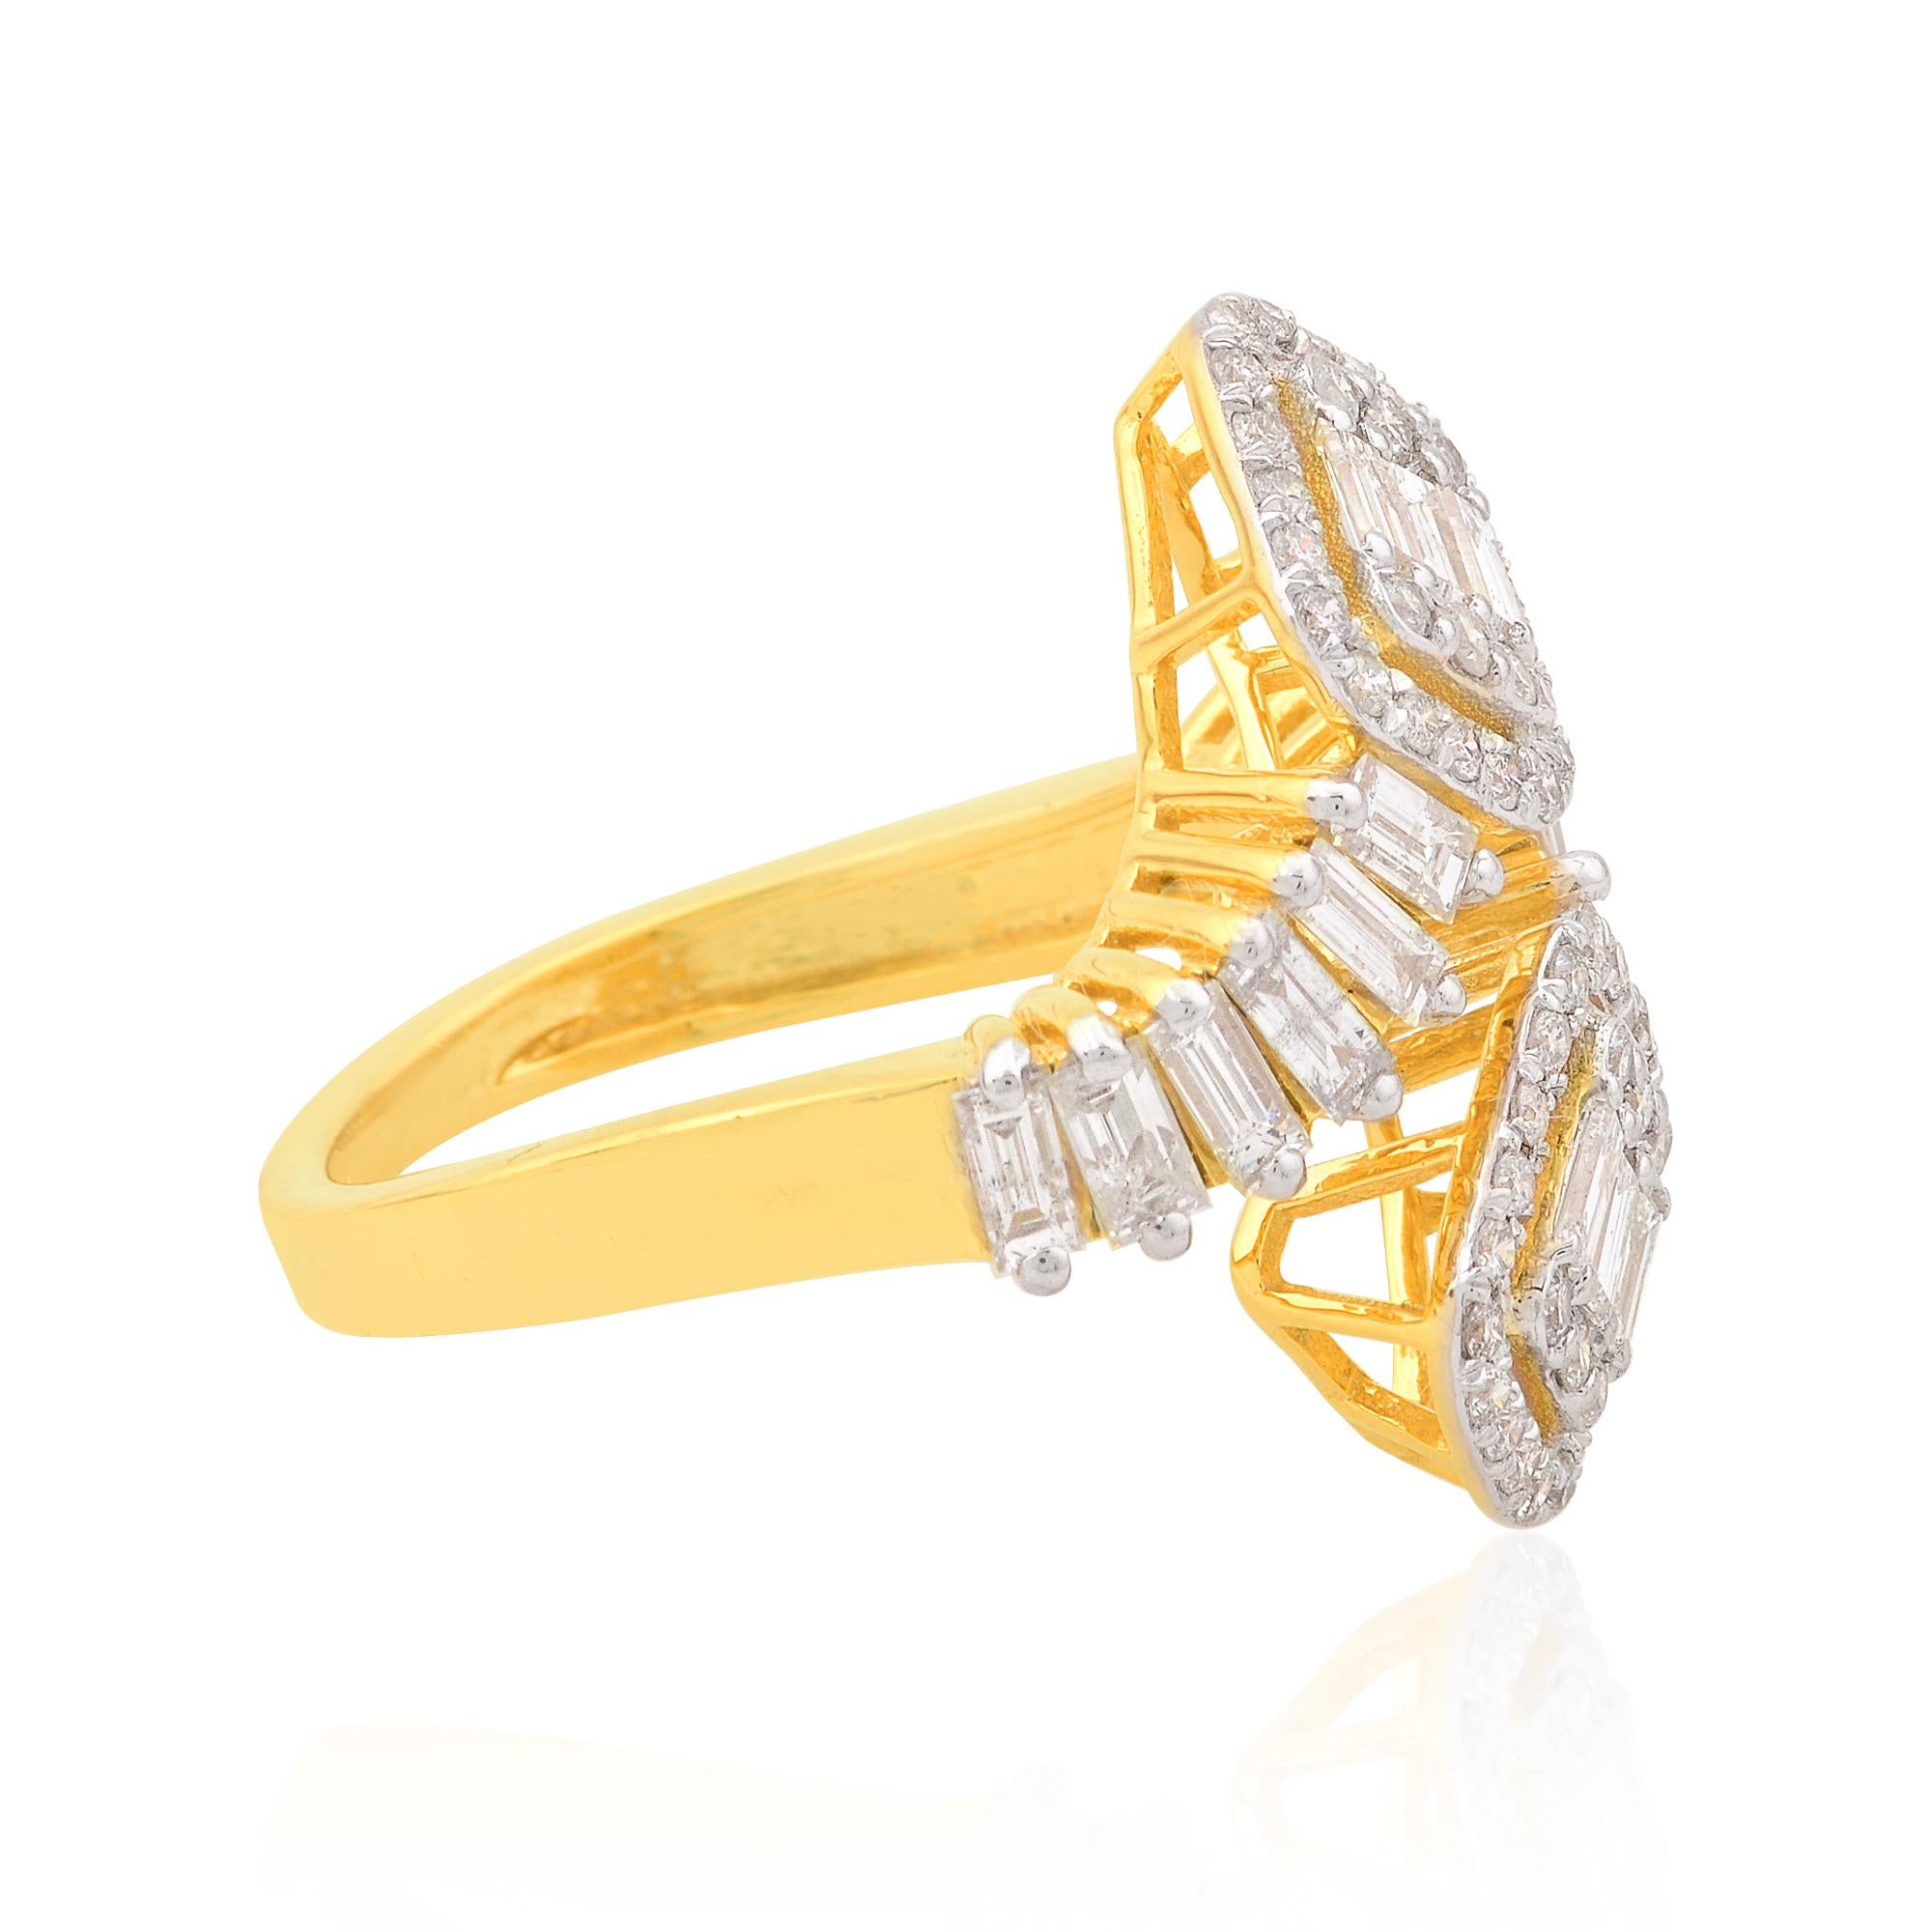 Set in 18 karat yellow gold, a rich and radiant metal revered for its warmth and luxurious appeal, the setting of this ring enhances the natural beauty of the diamonds, creating a striking contrast that captivates the senses. The smooth, polished